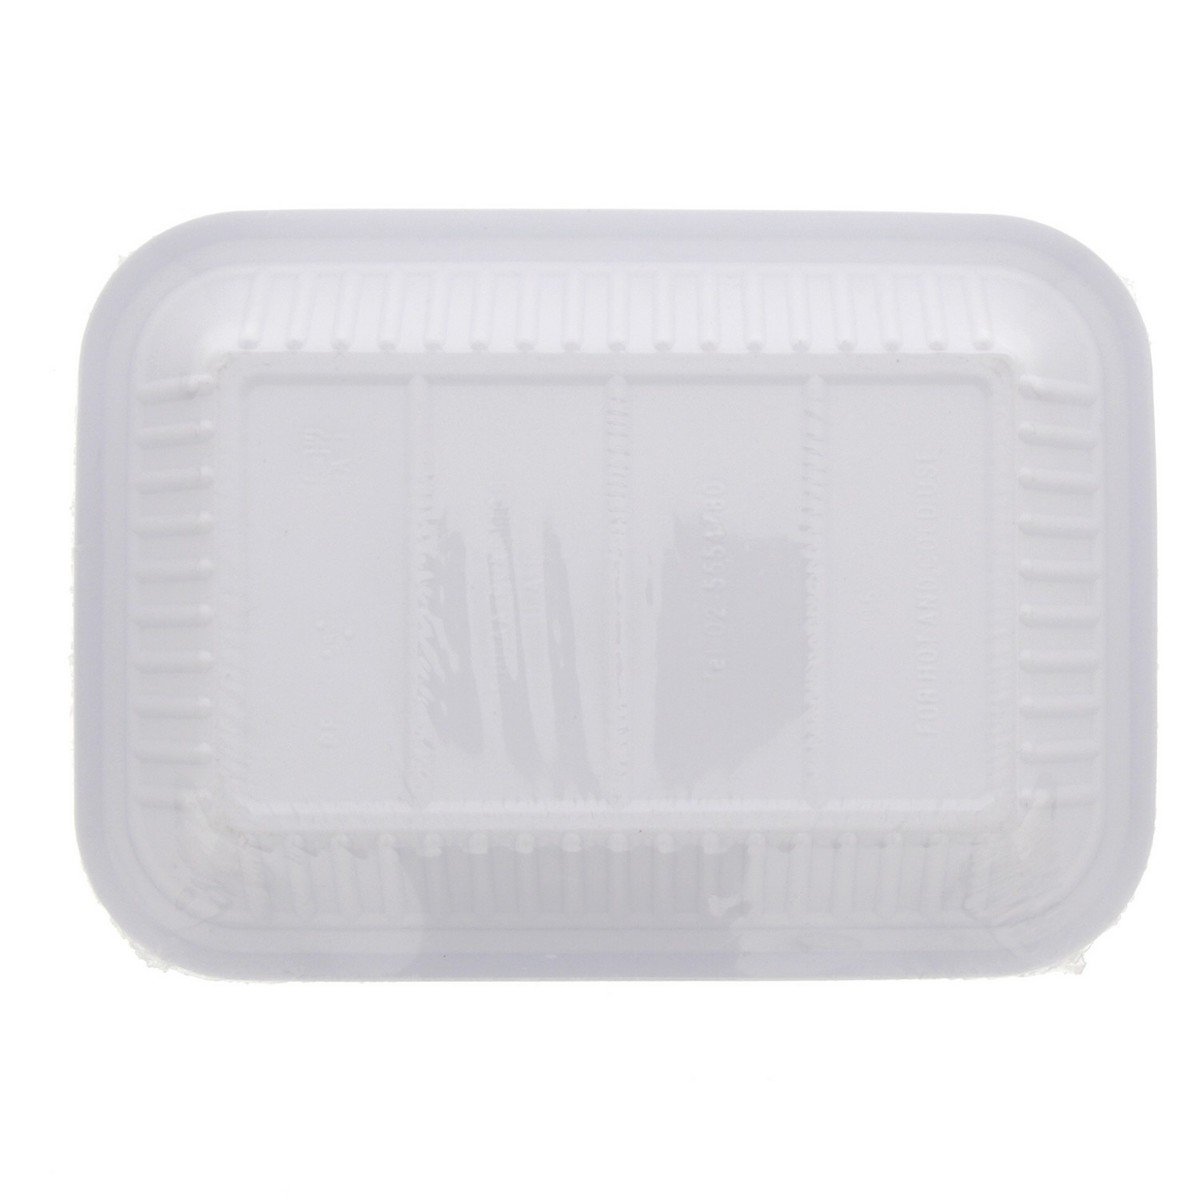 Home Mate Plastic Tray 7.5x5inch 250g Approx Online at Best Price, Plates  & Trays